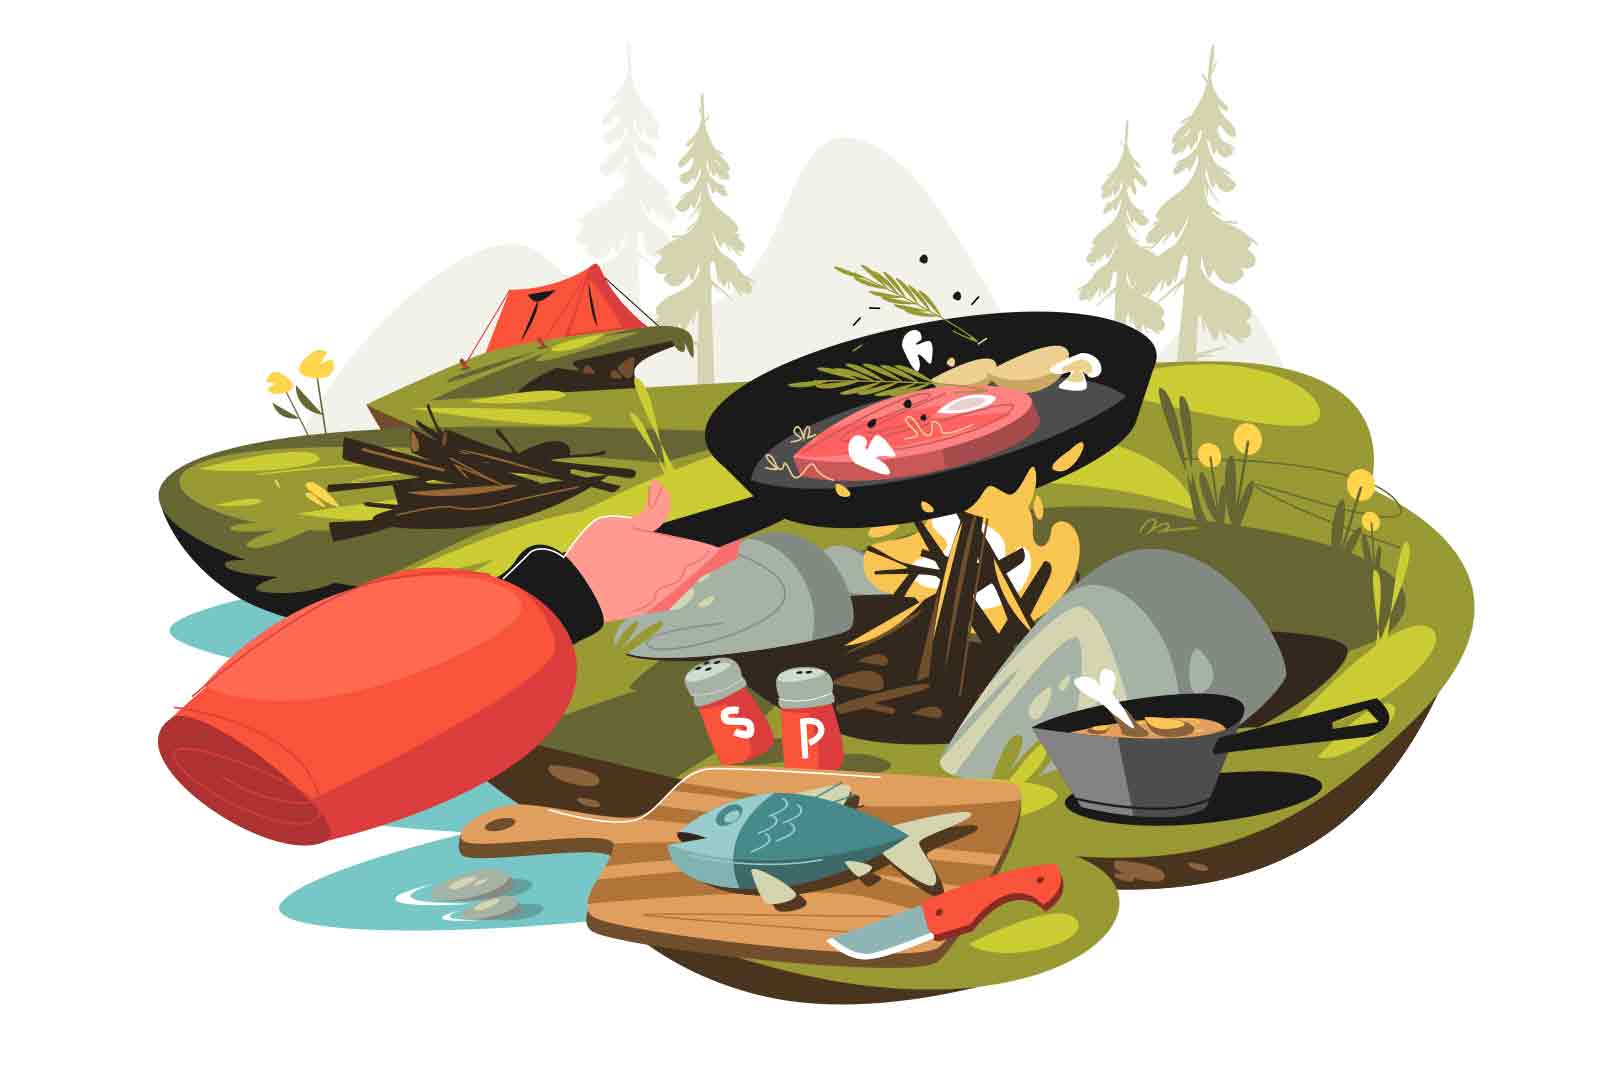 Camping composition with tent and man cooking on bonfire vector illustration. Outdoor food flat style concept. Picnic time idea